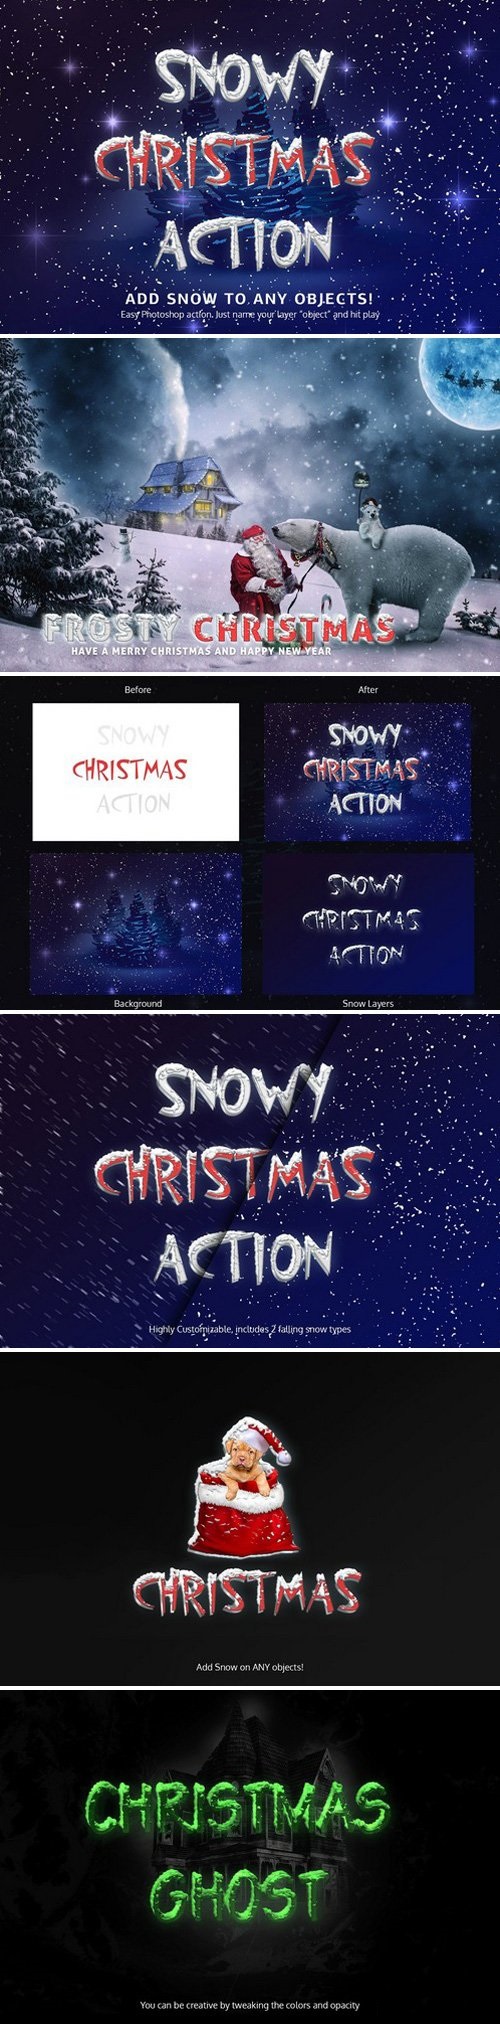 Snowy Christmas Action 2153889